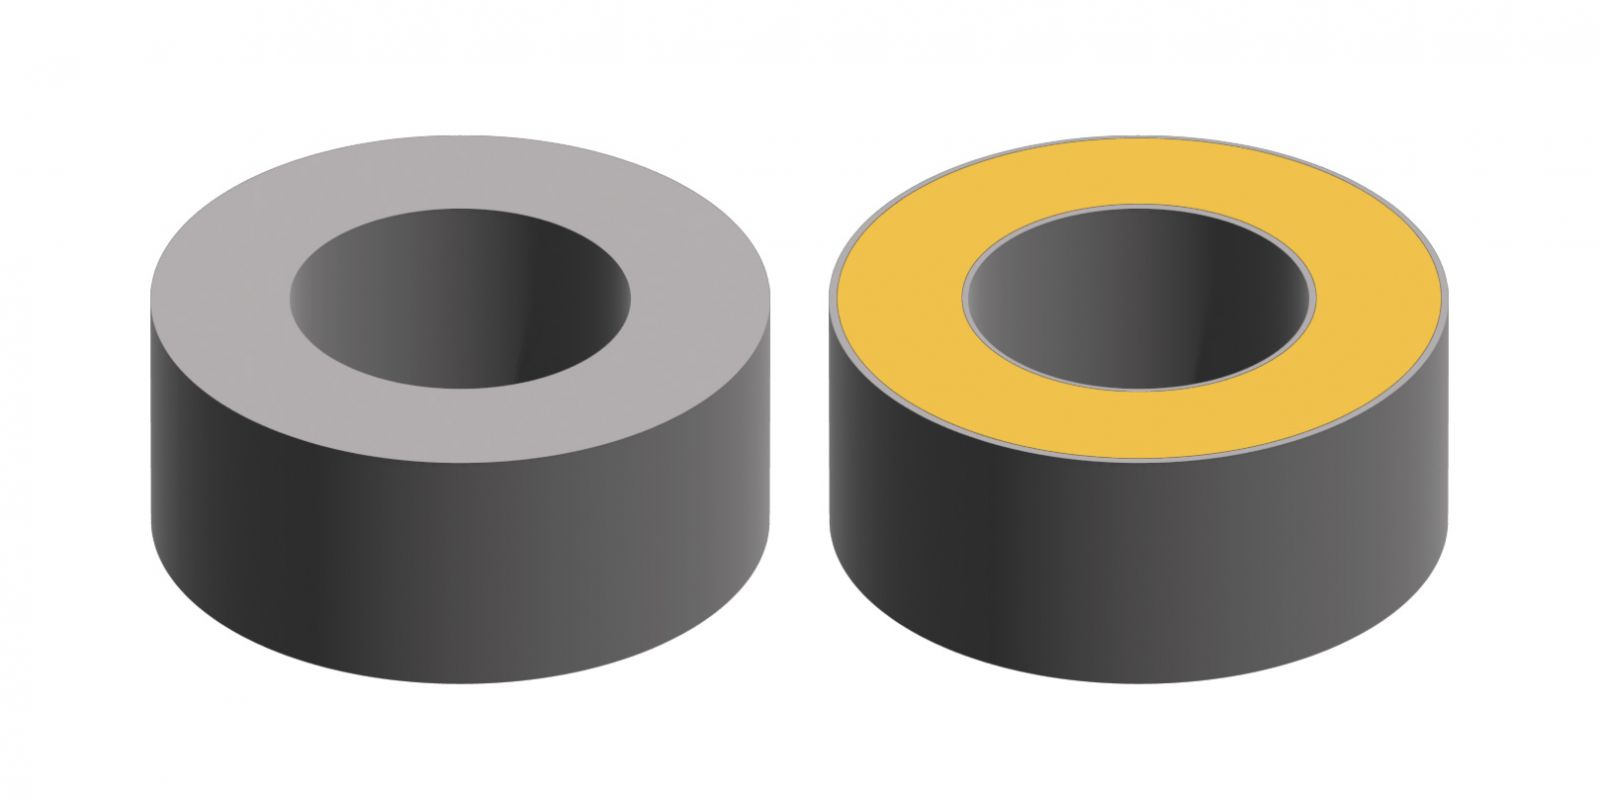 33 material-GOTREND Article-What does the color of the inductor ring mean? High conductivity ring